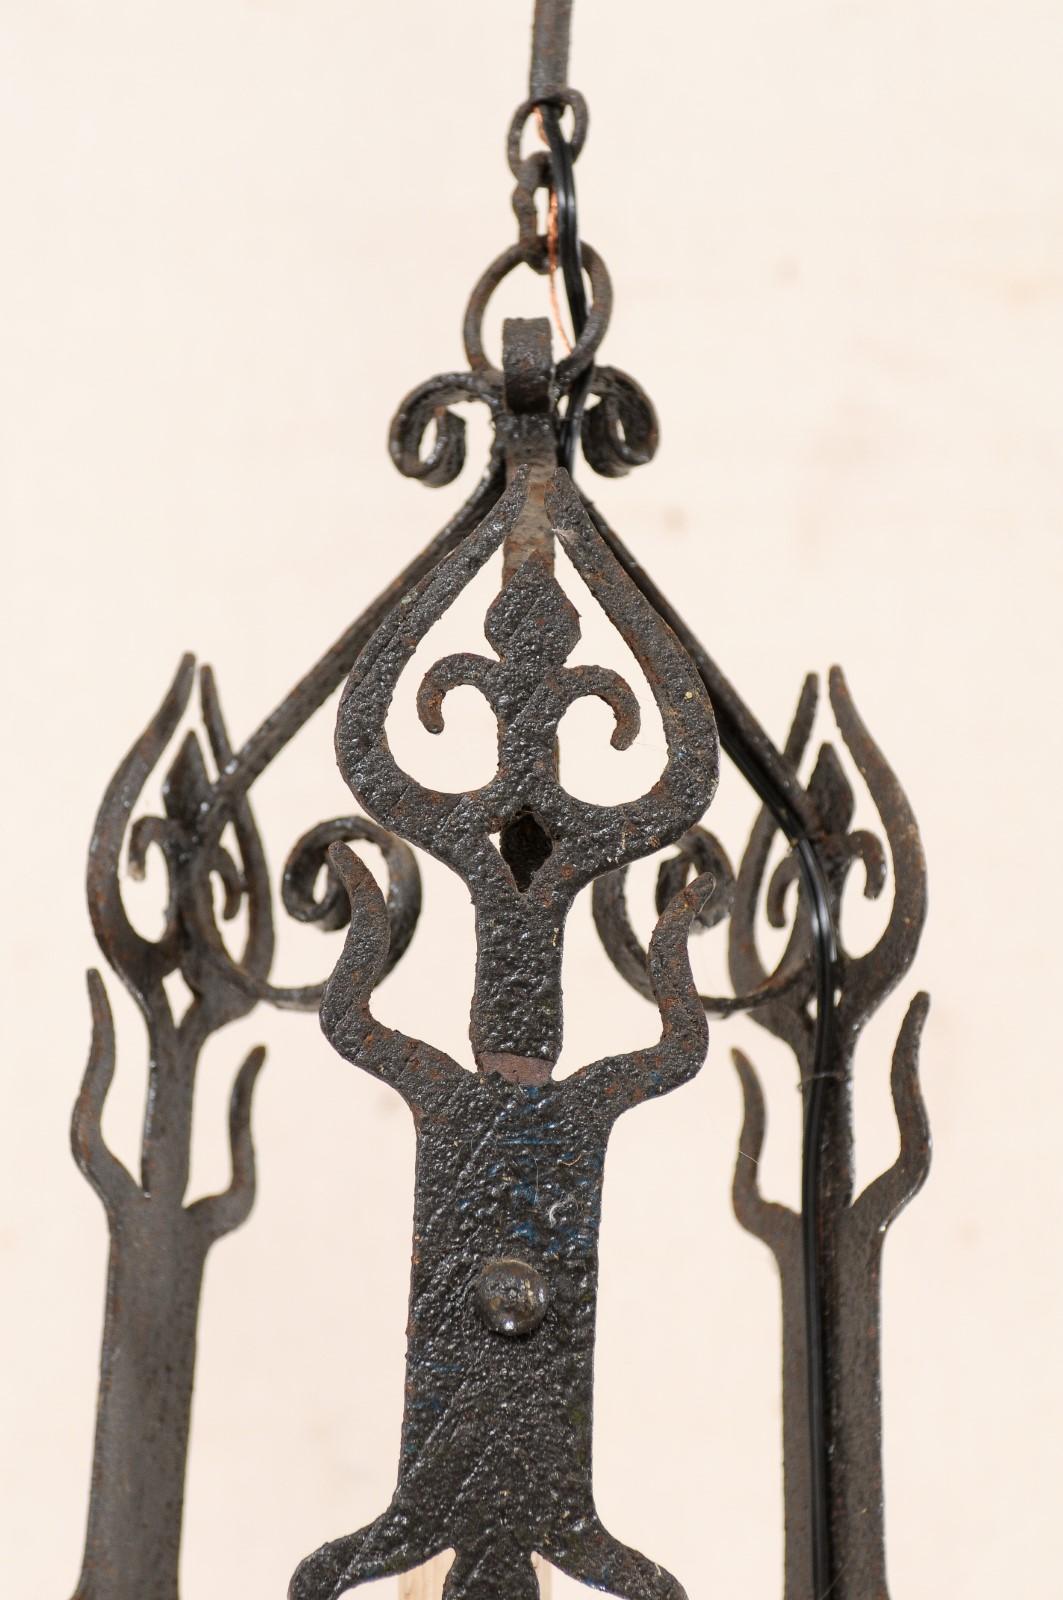 French Single Light Iron Chandelier Lantern from the Mid-20th Century (Metall)